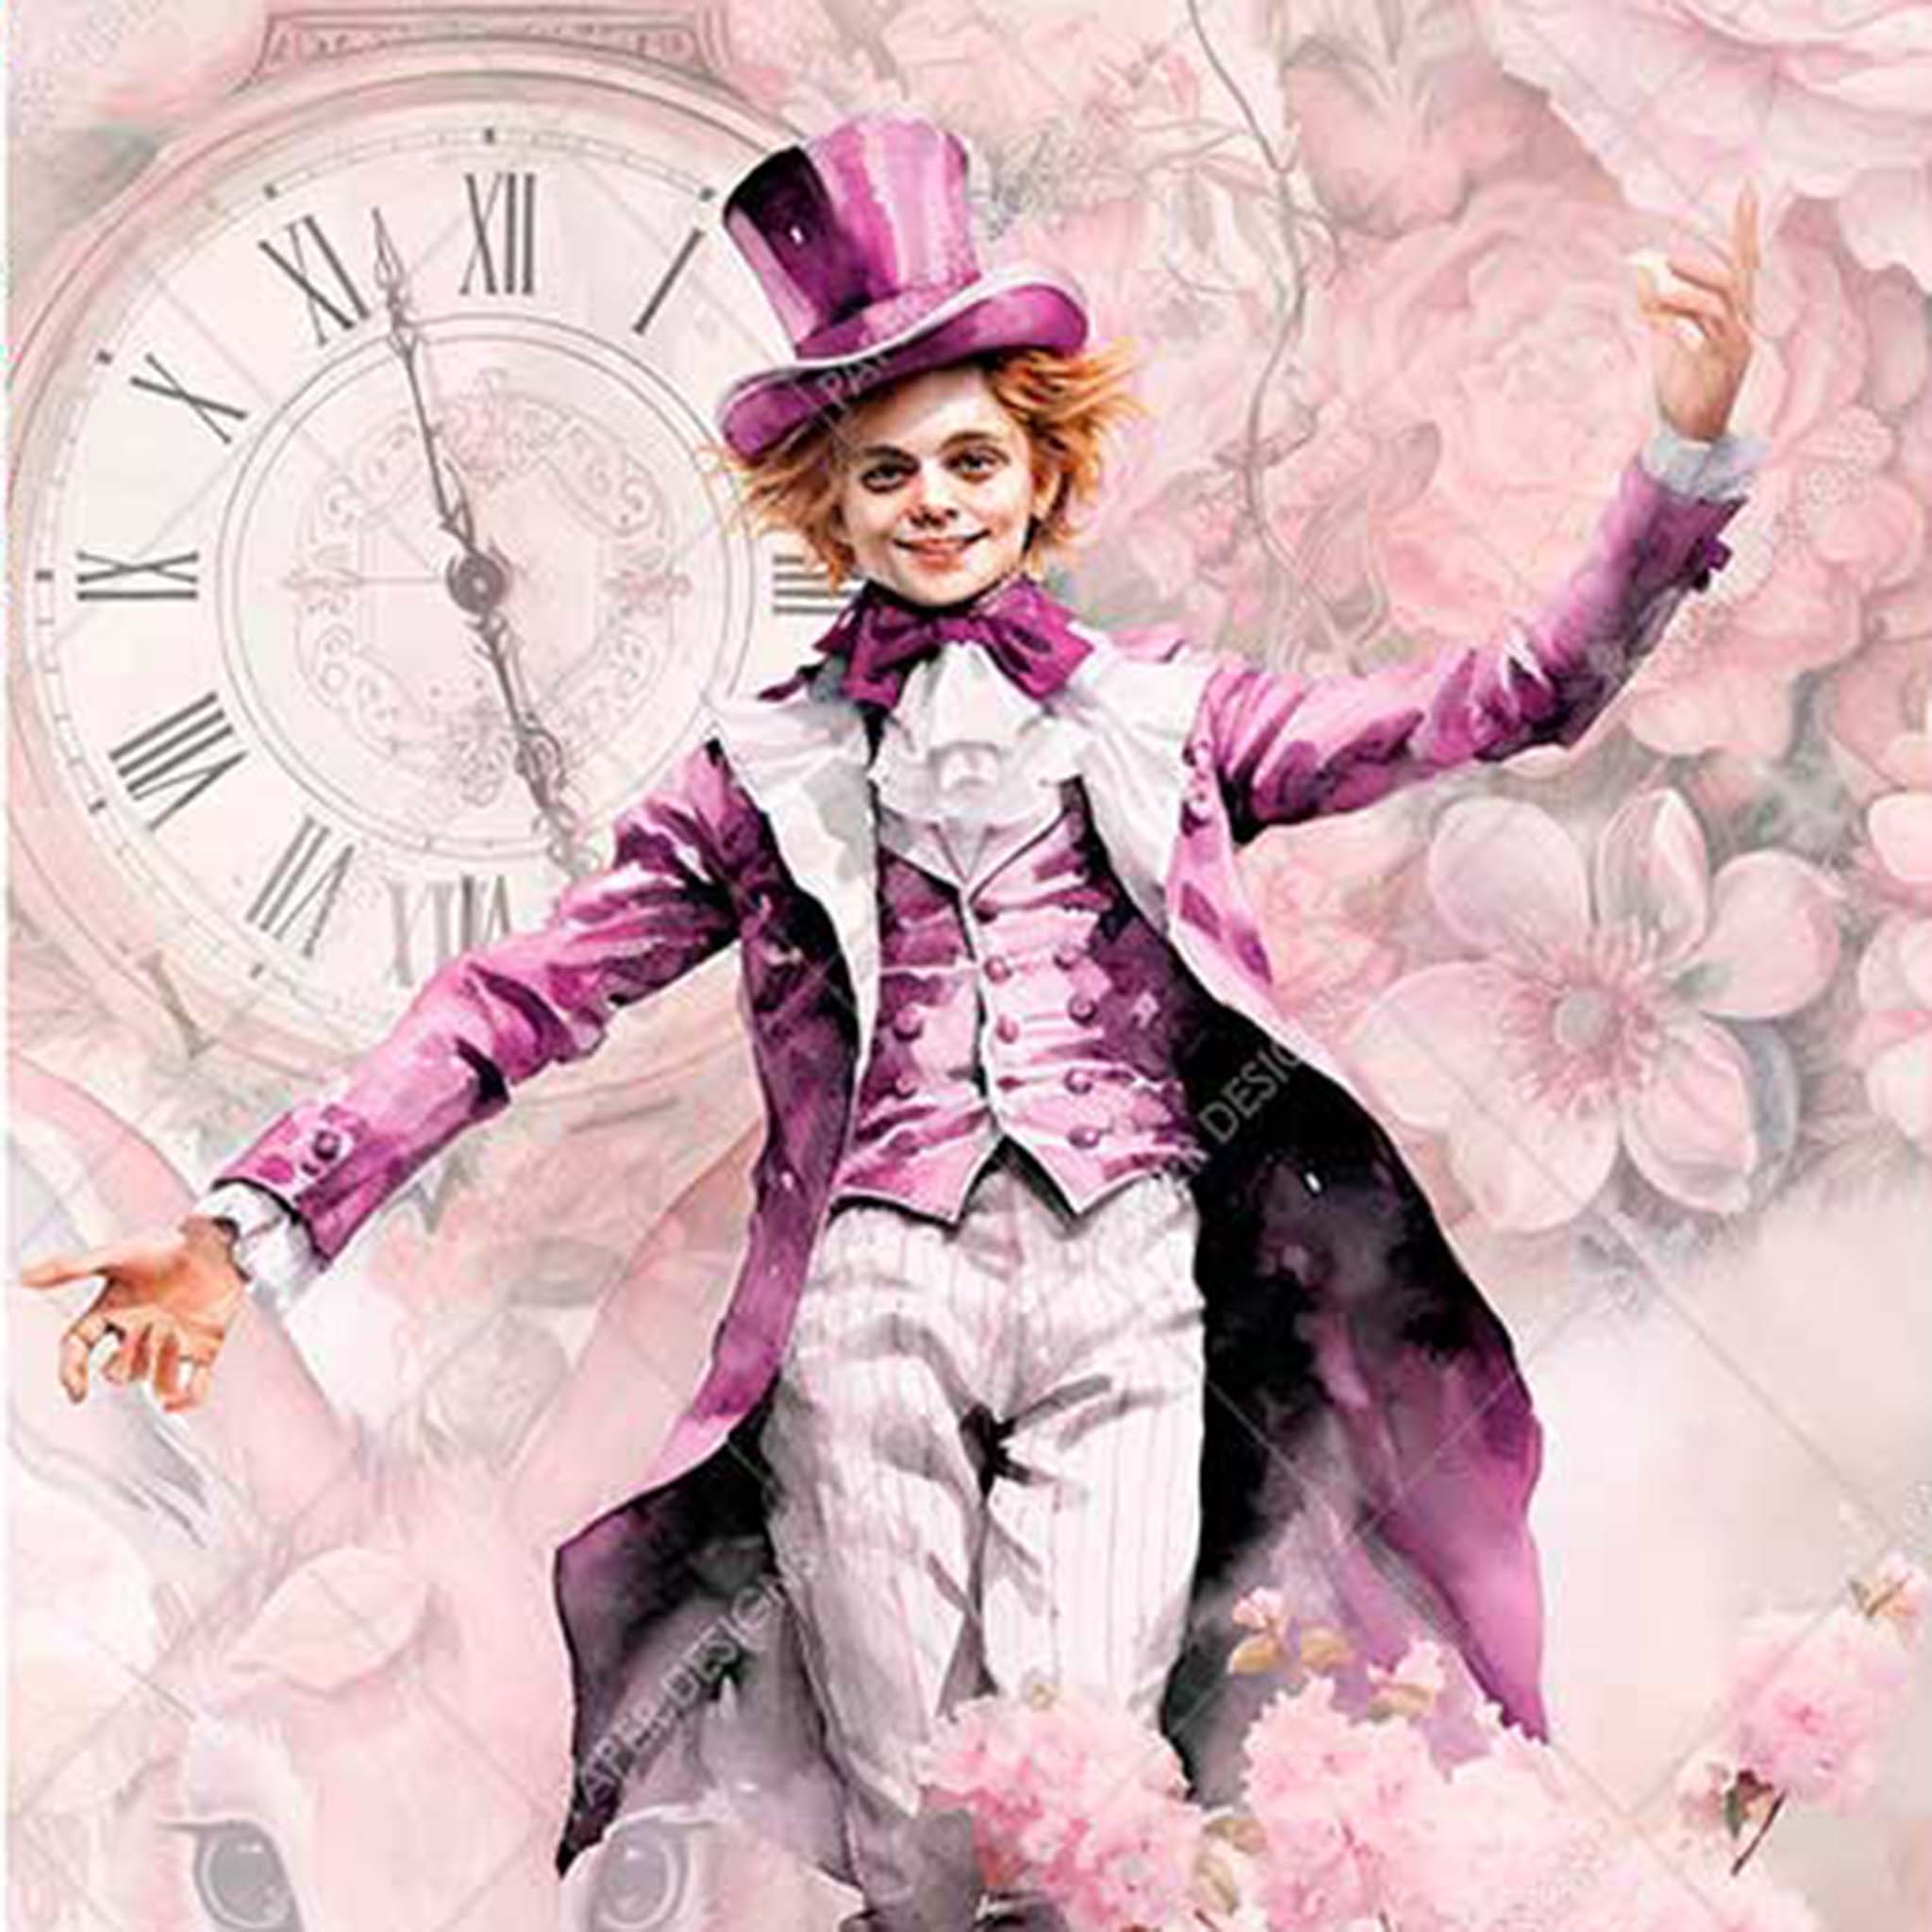 Close-up of an A0 rice paper design featuring The Mad Hatter and a tea set against a large clock face and rabbit face in front of a pink floral background.